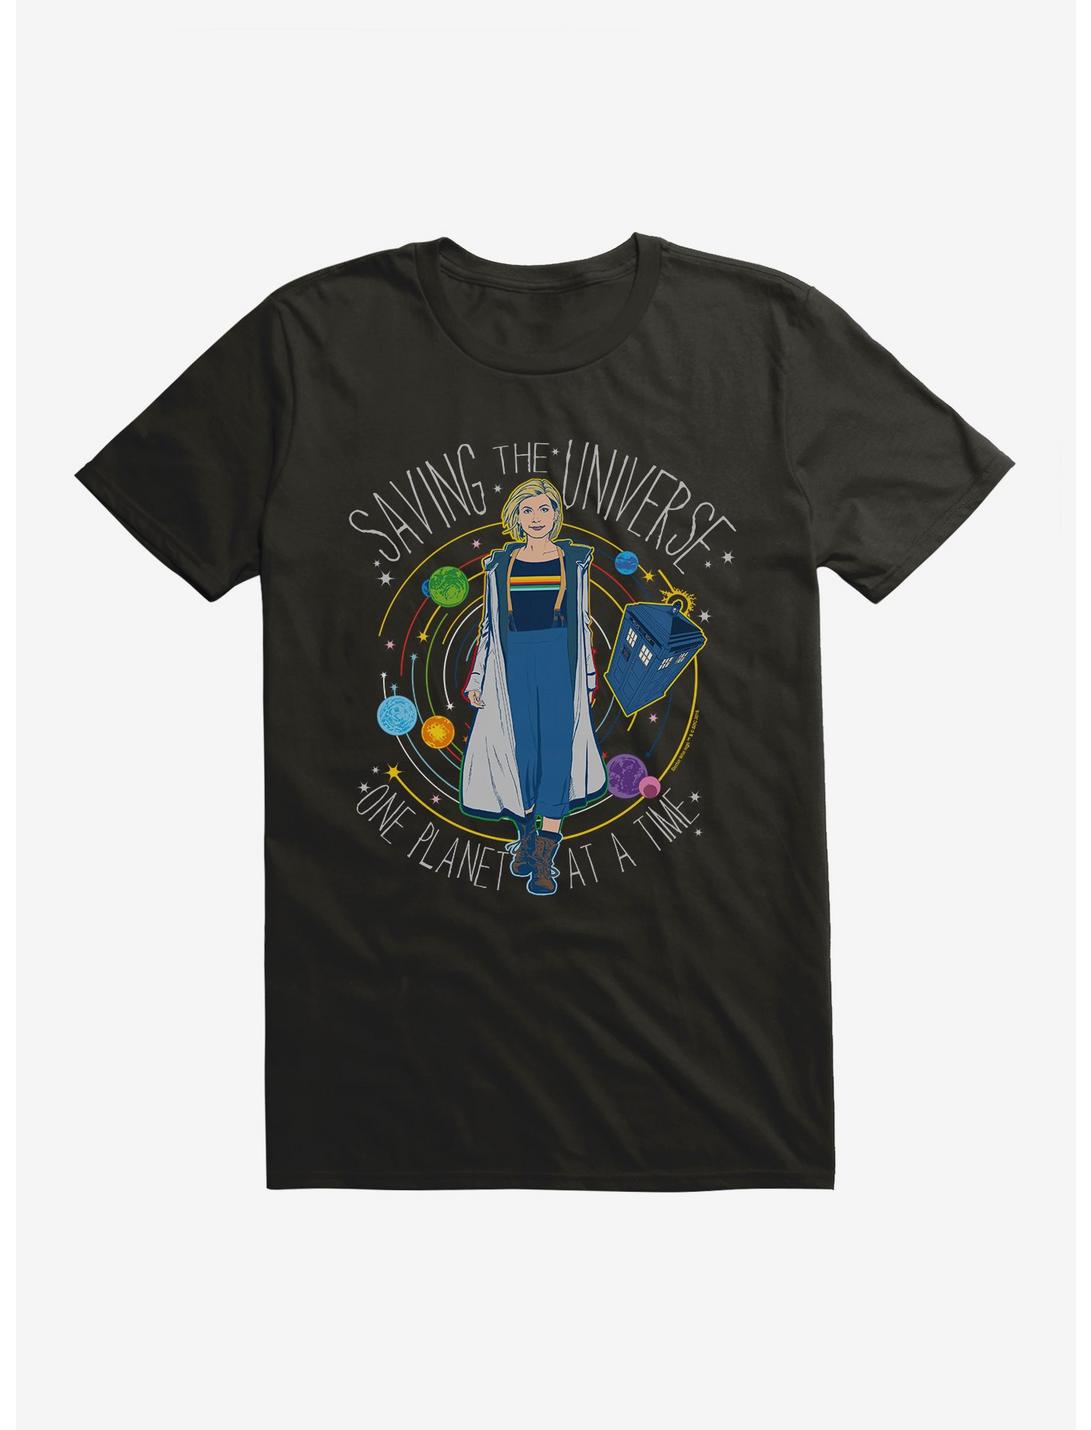 Doctor Who The Thirteenth Doctor Saving The Universe One Planet At A Time T-Shirt, BLACK, hi-res